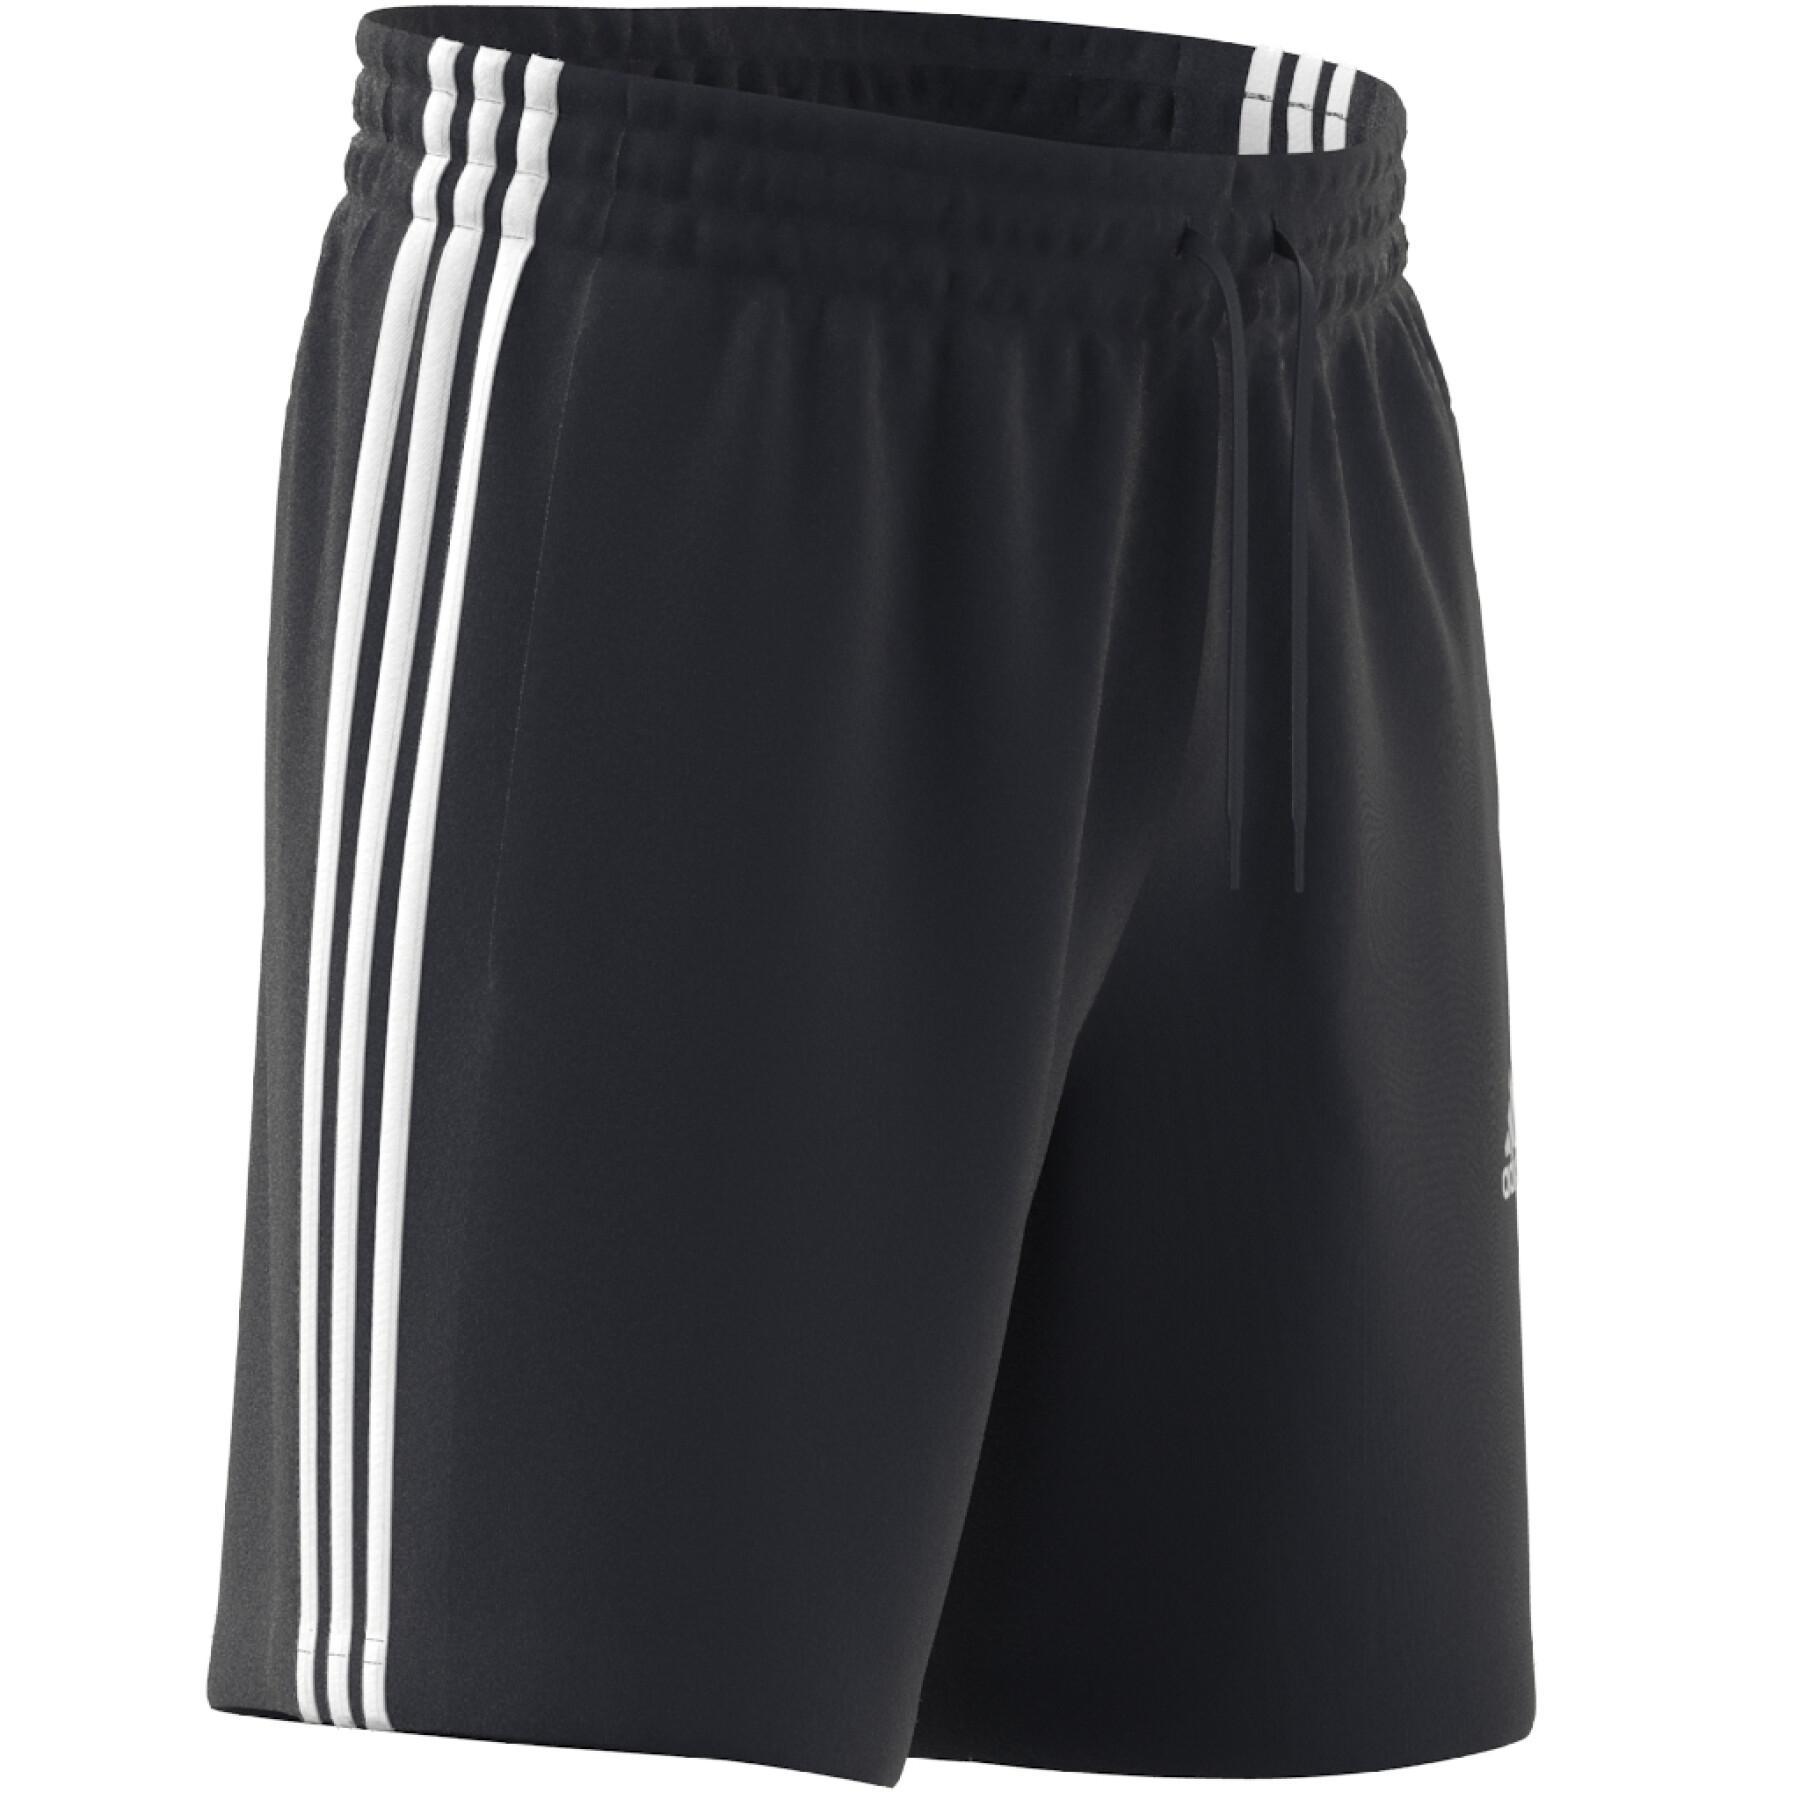 Shorts adidas Essentials French Terry 3-Stripes